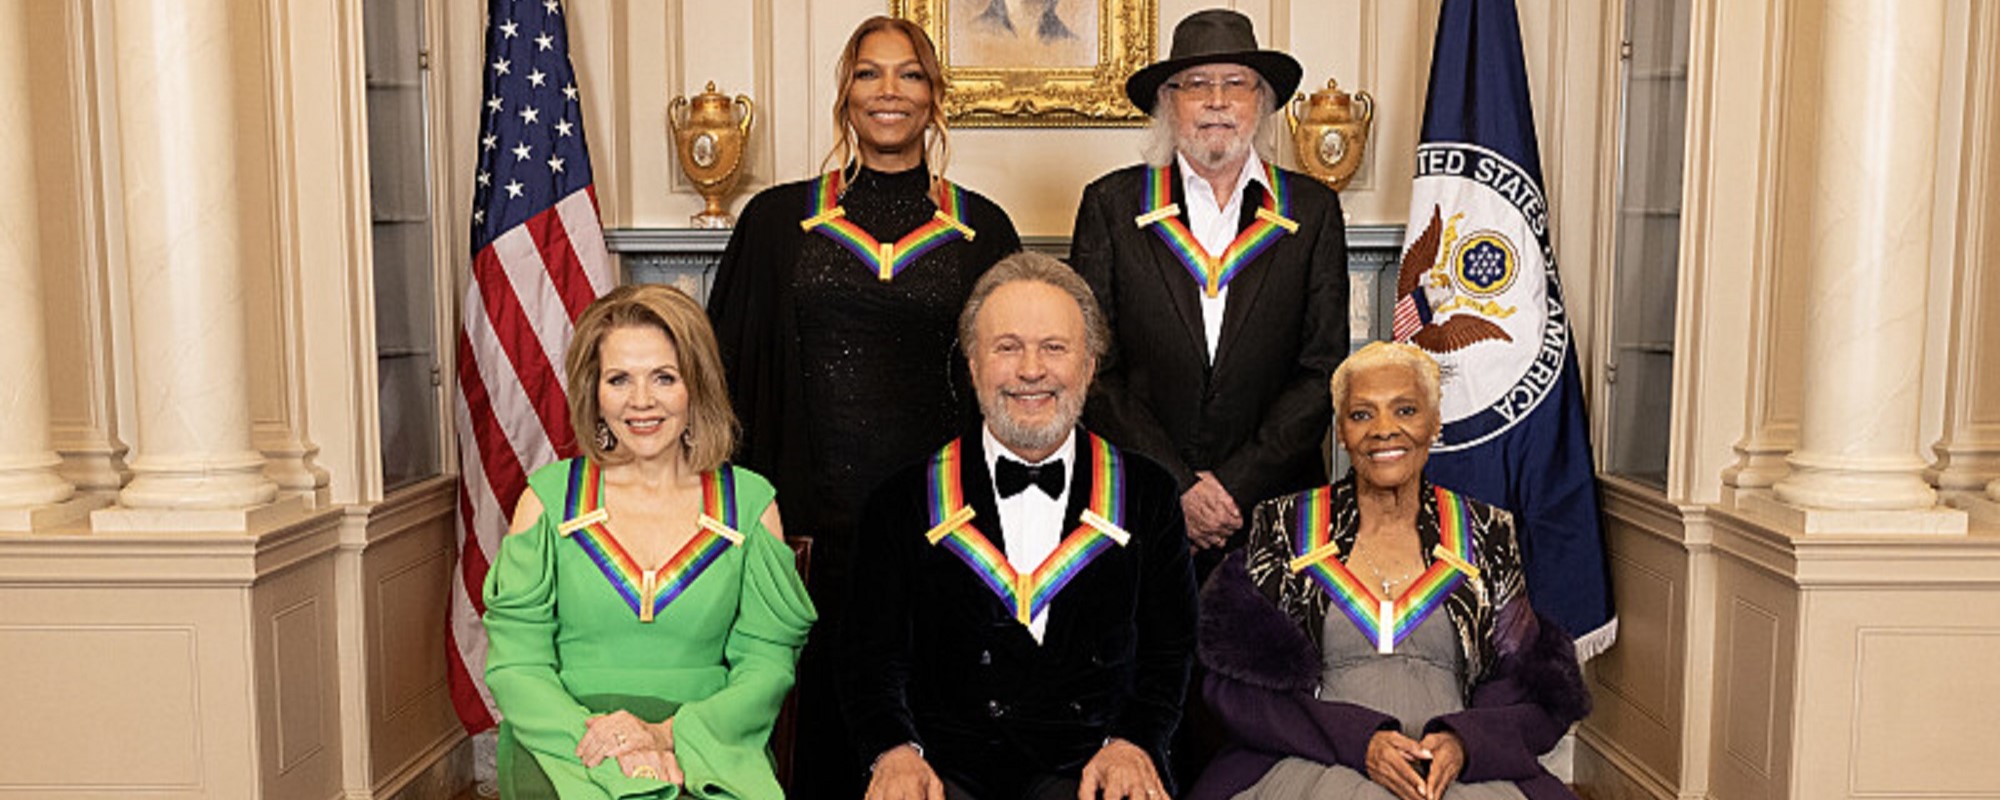 How To Watch ‘The 46th Kennedy Center Honors’ Featuring Tributes to Barry Gibb, Dionne Warwick, Queen Latifah & More